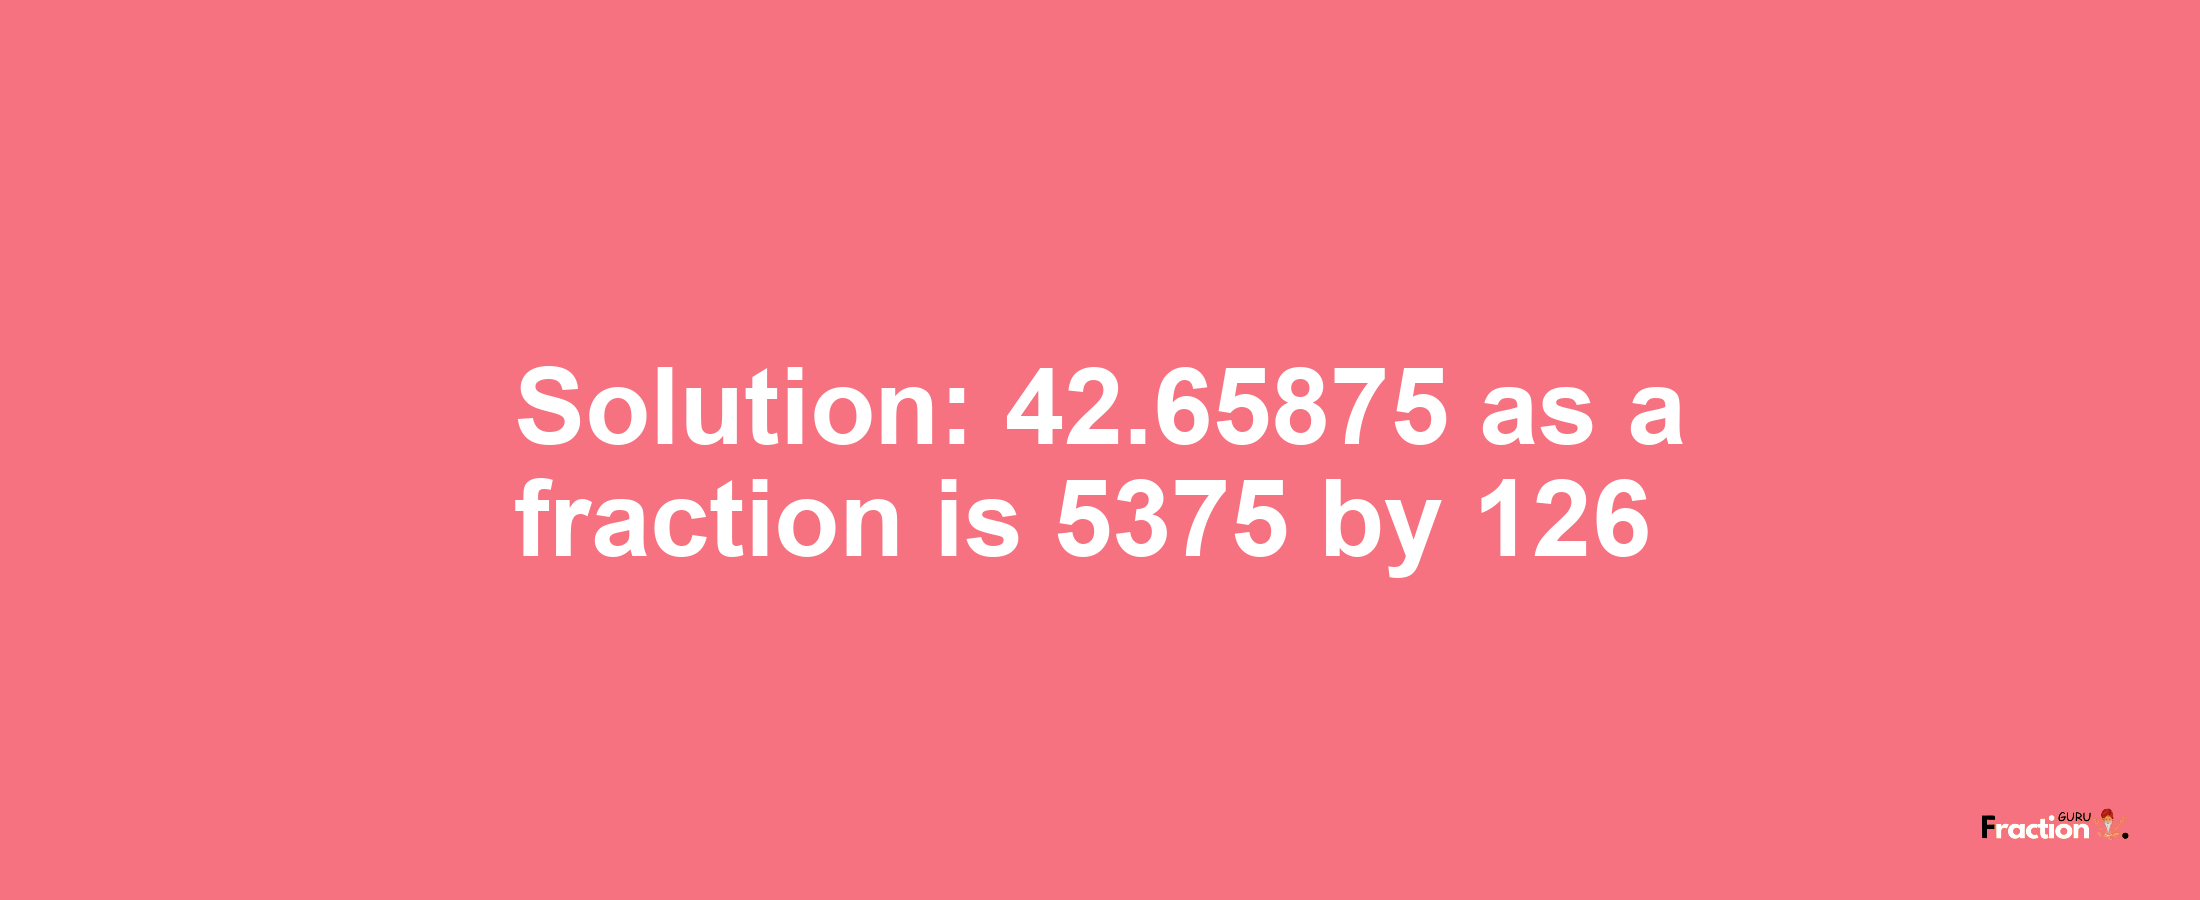 Solution:42.65875 as a fraction is 5375/126